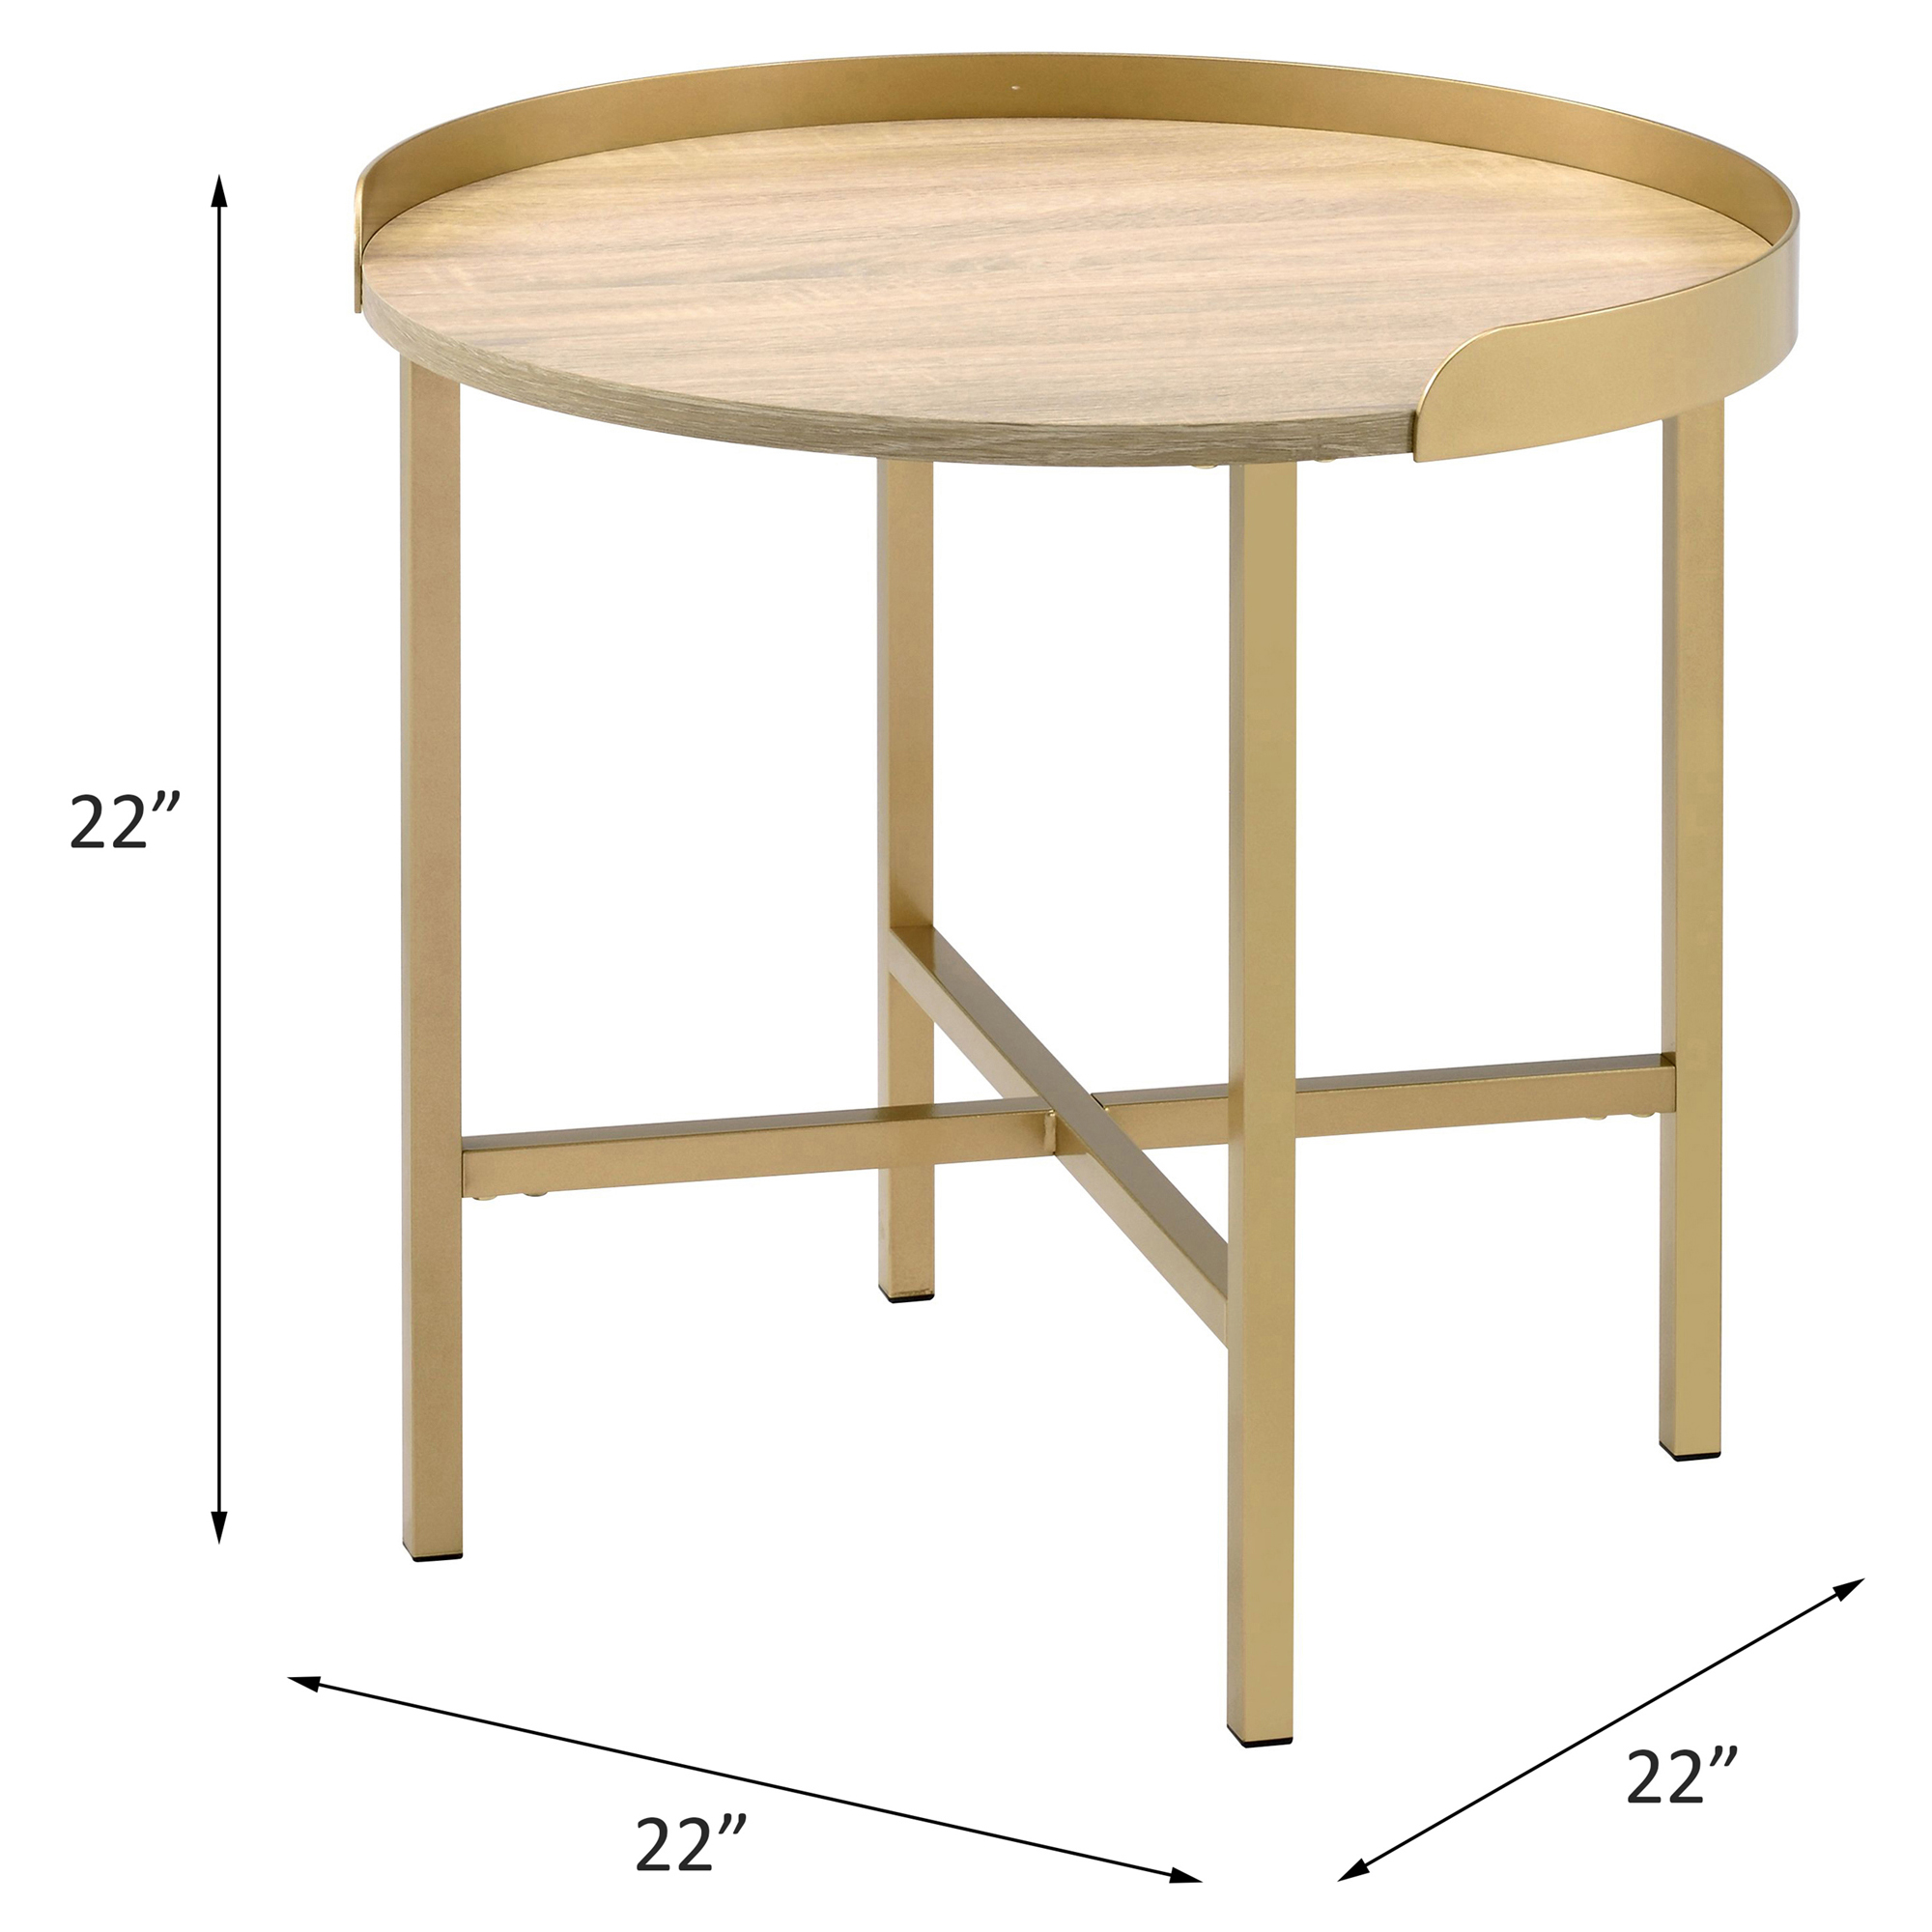 ACME Mithea Round End Table in Oak and Gold - image 5 of 5